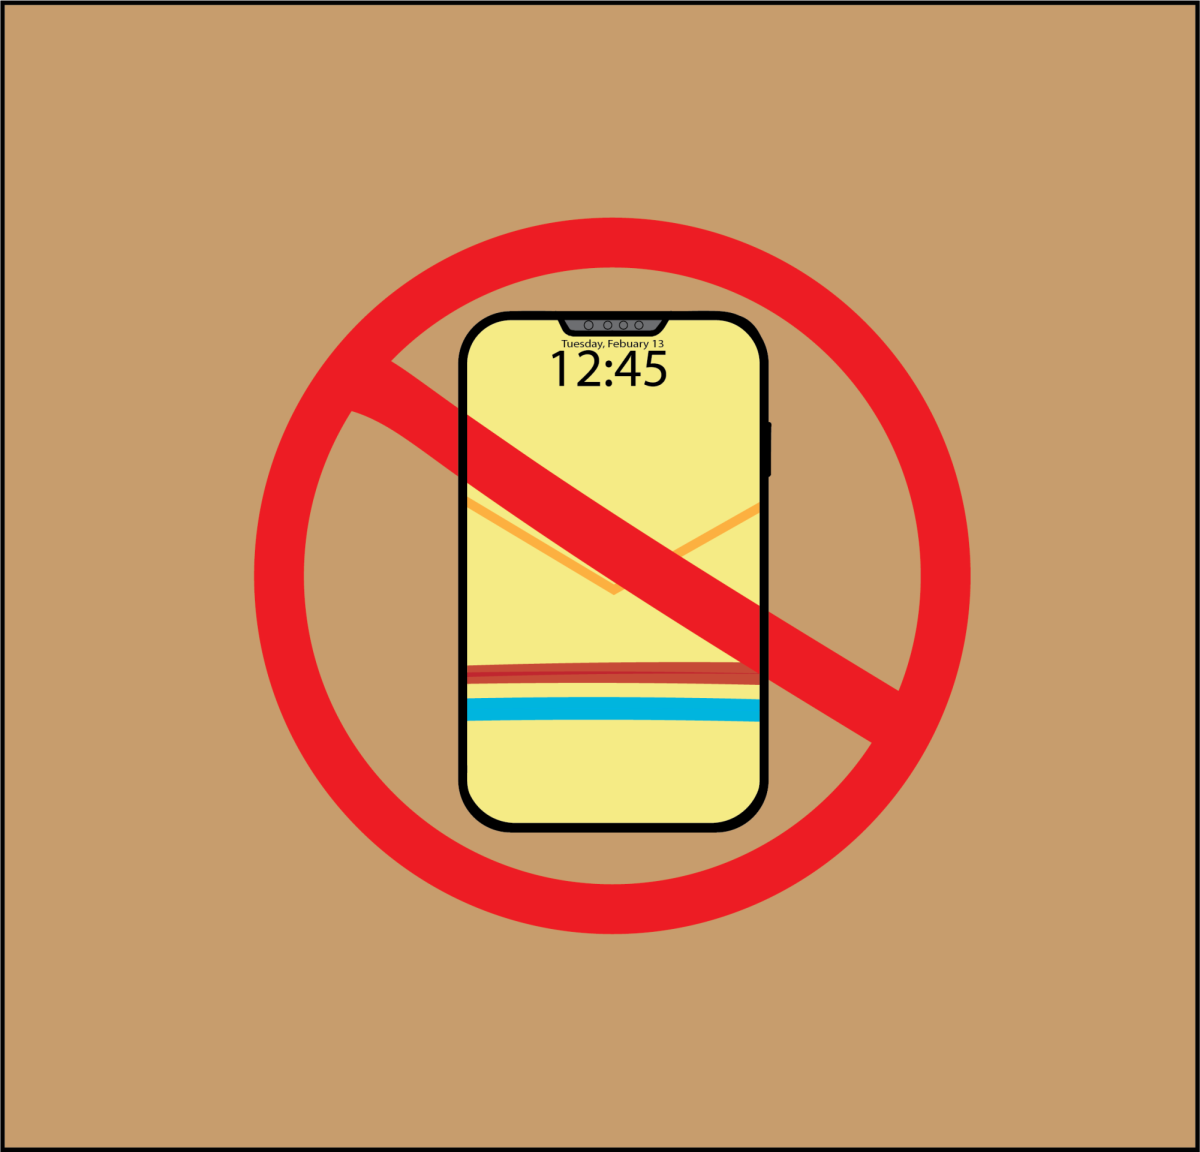 Phone Policy Positively Impacts Students